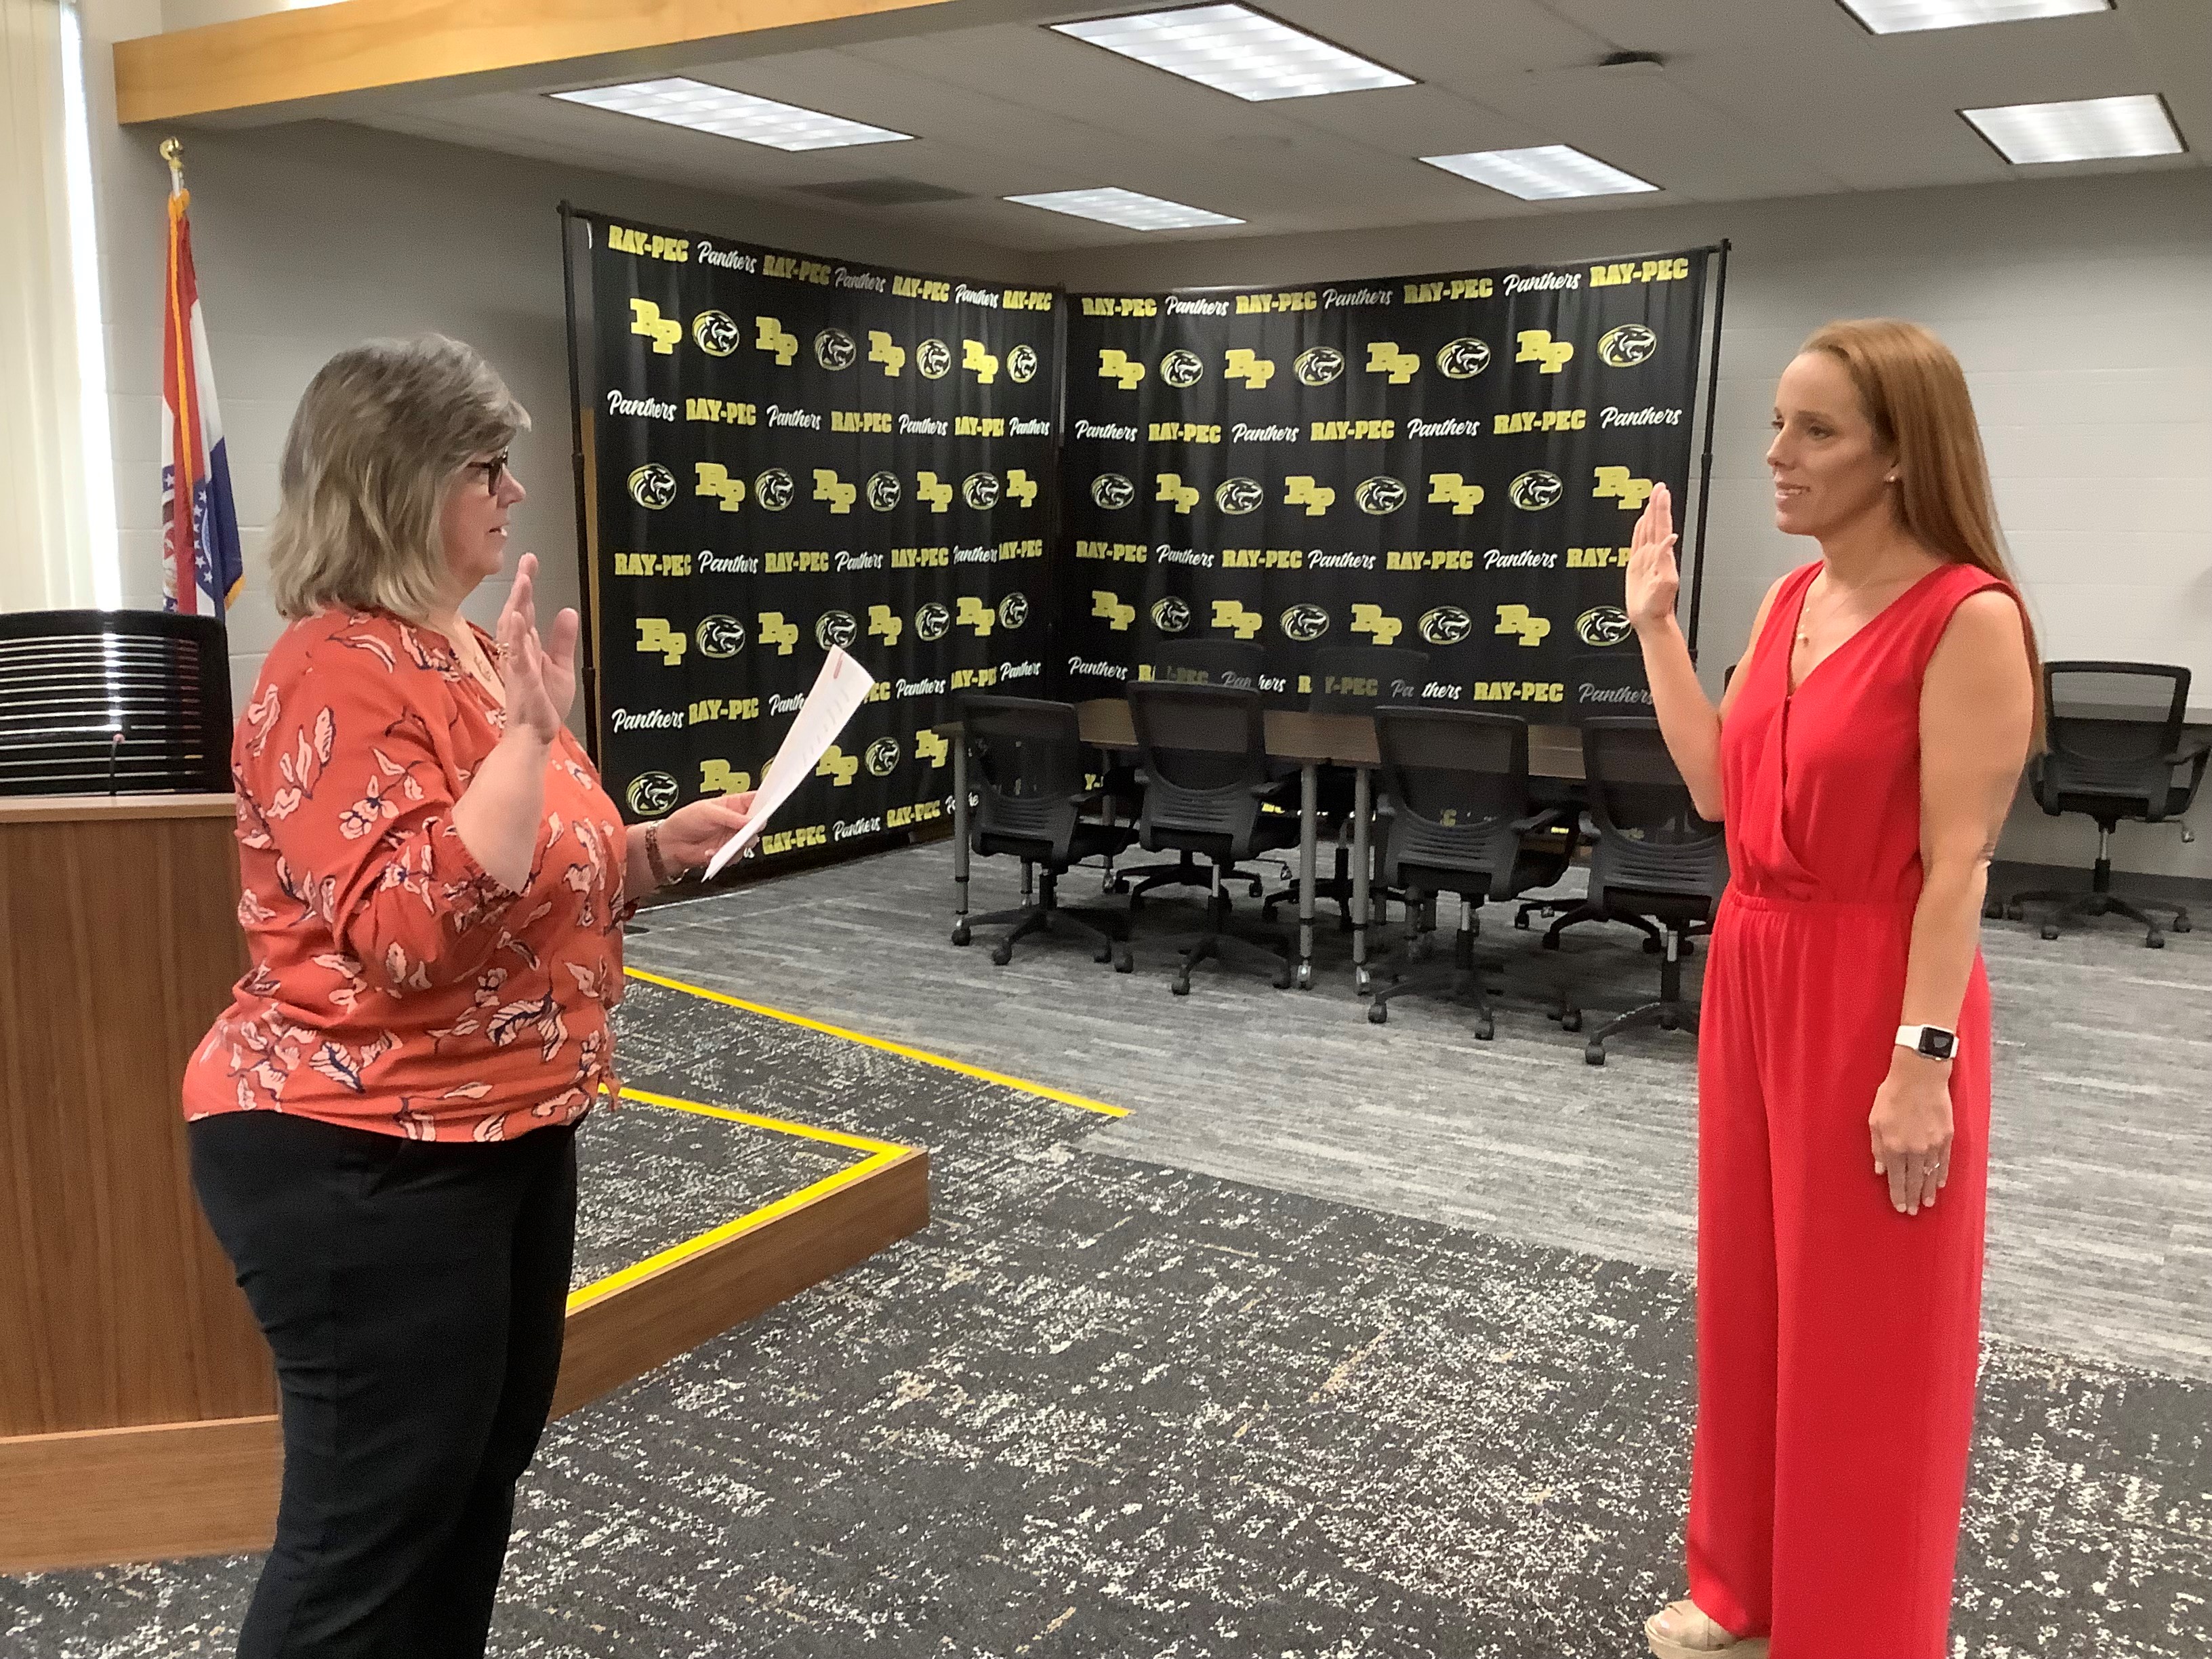 Pam Steele administers the oath of office to new Board Member Patty Phillips